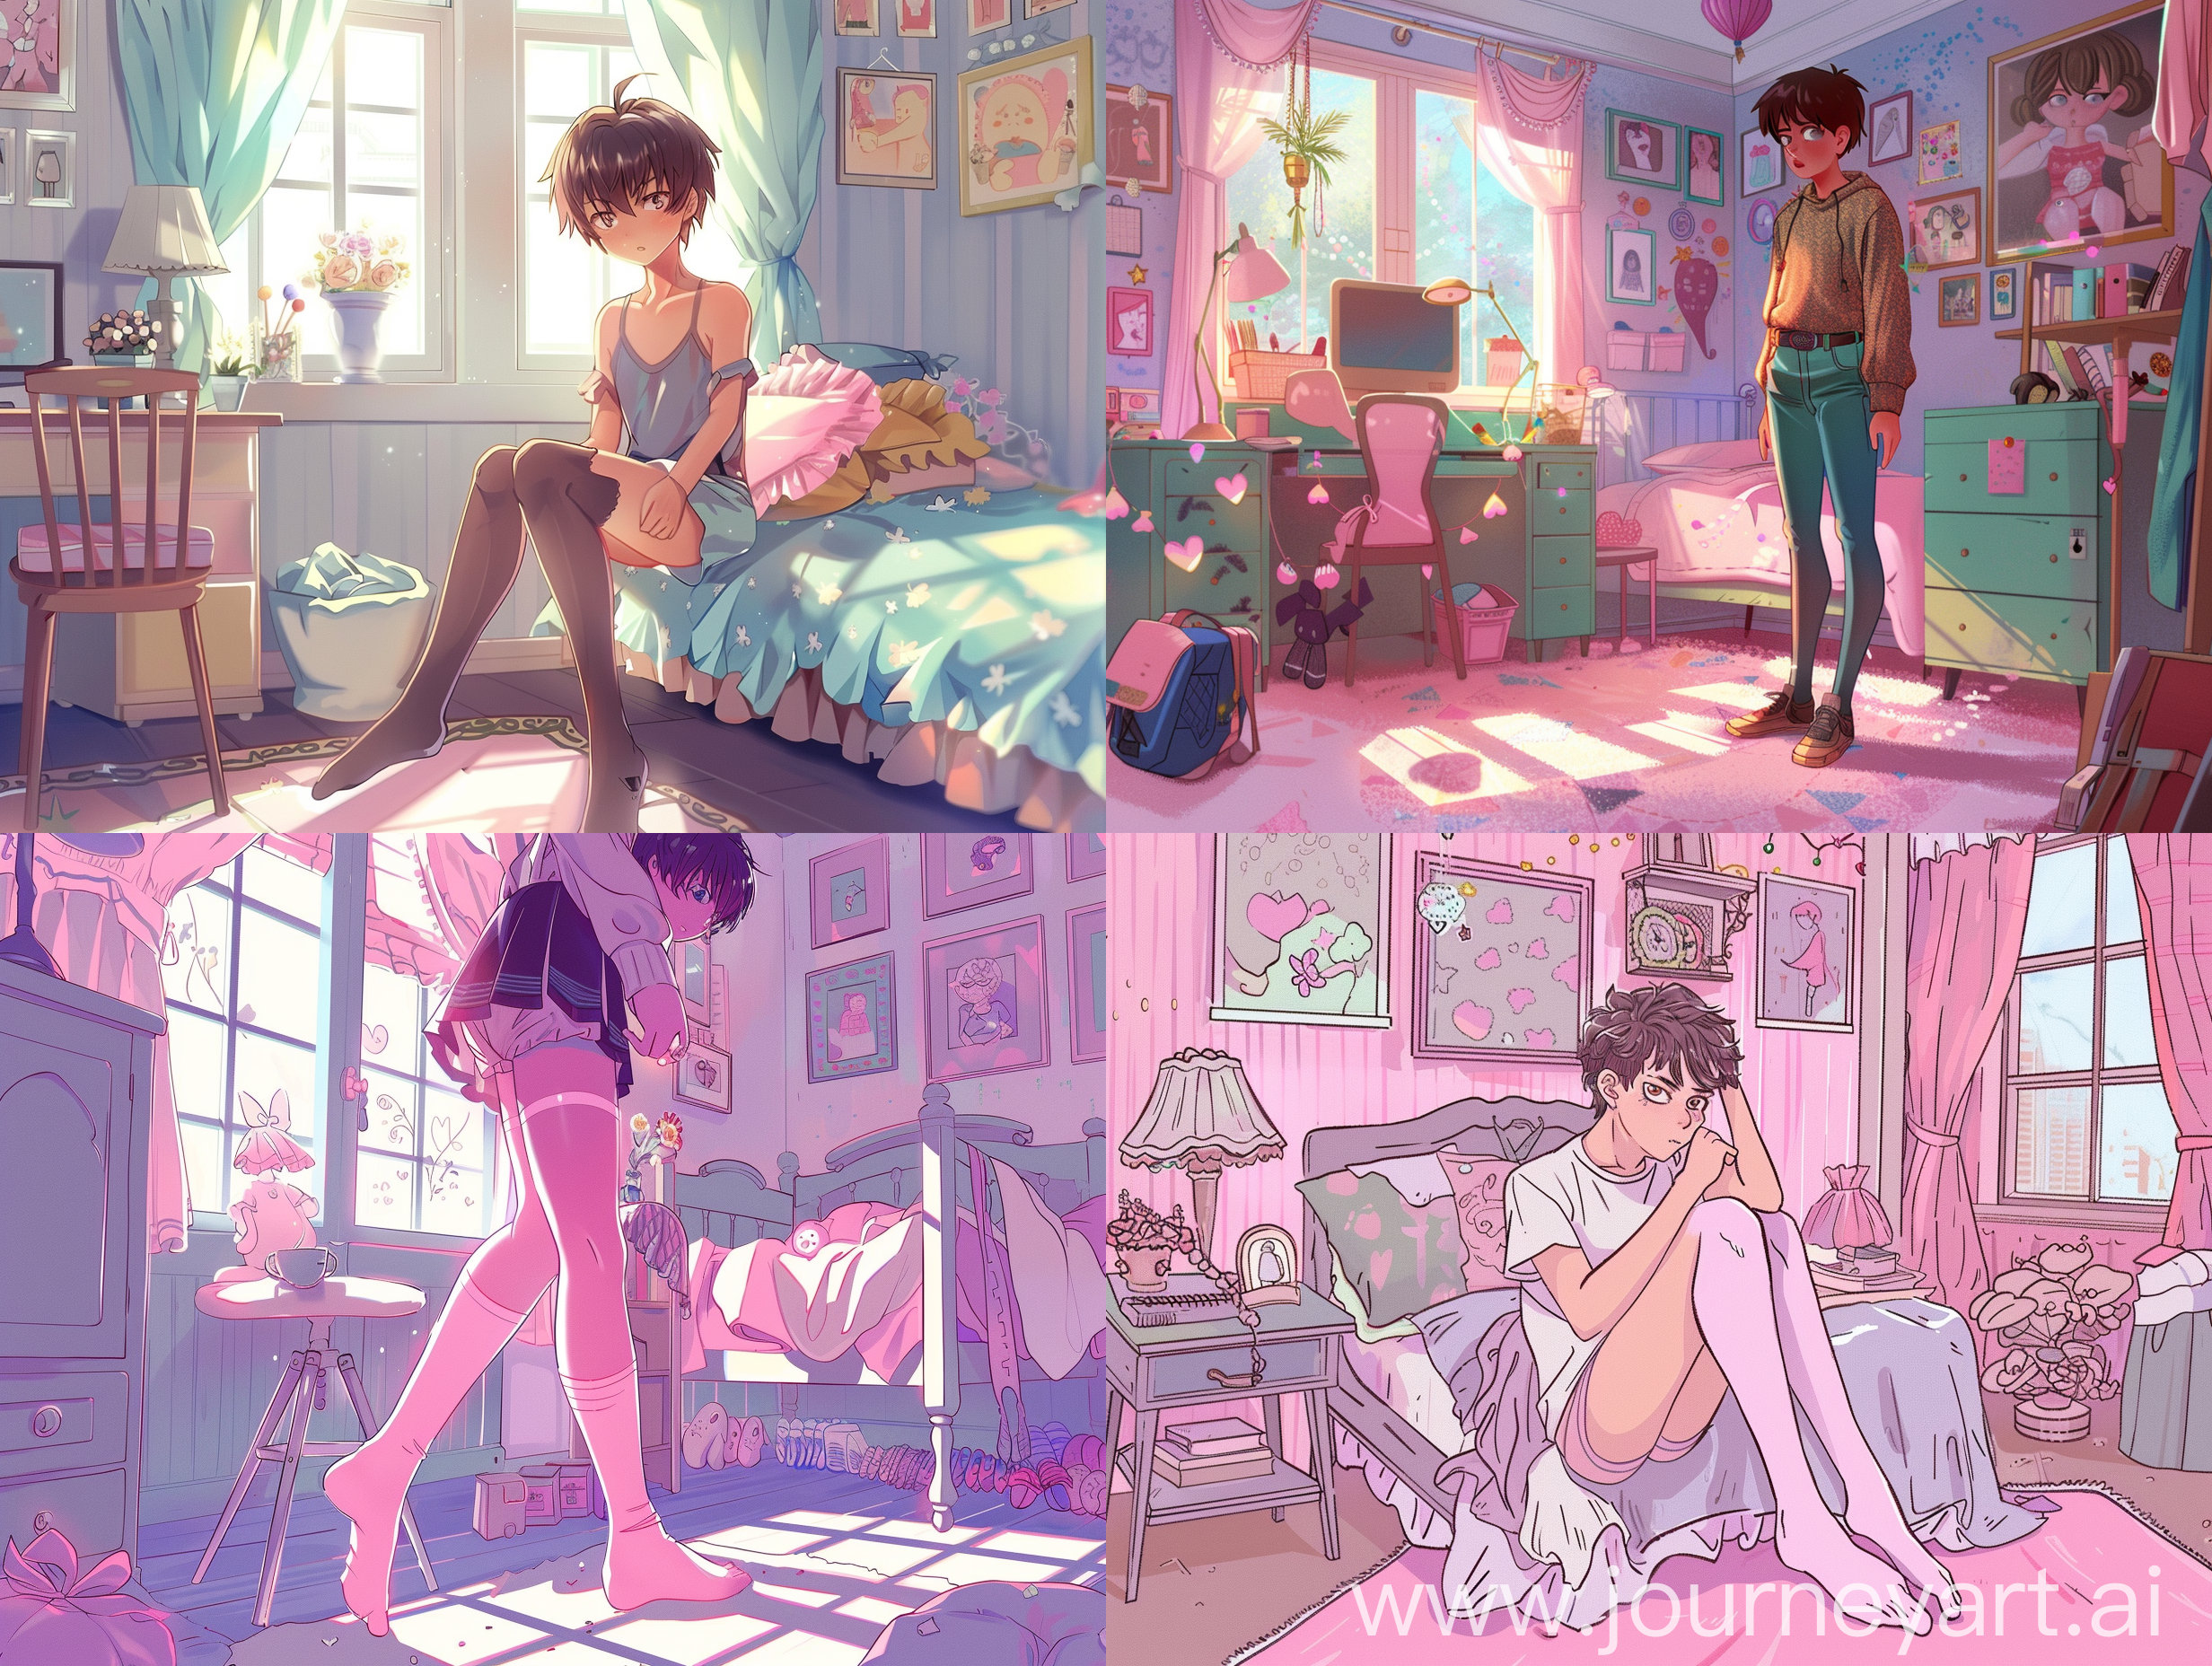 A boy wearing pantyhose in a  girly room, anime style